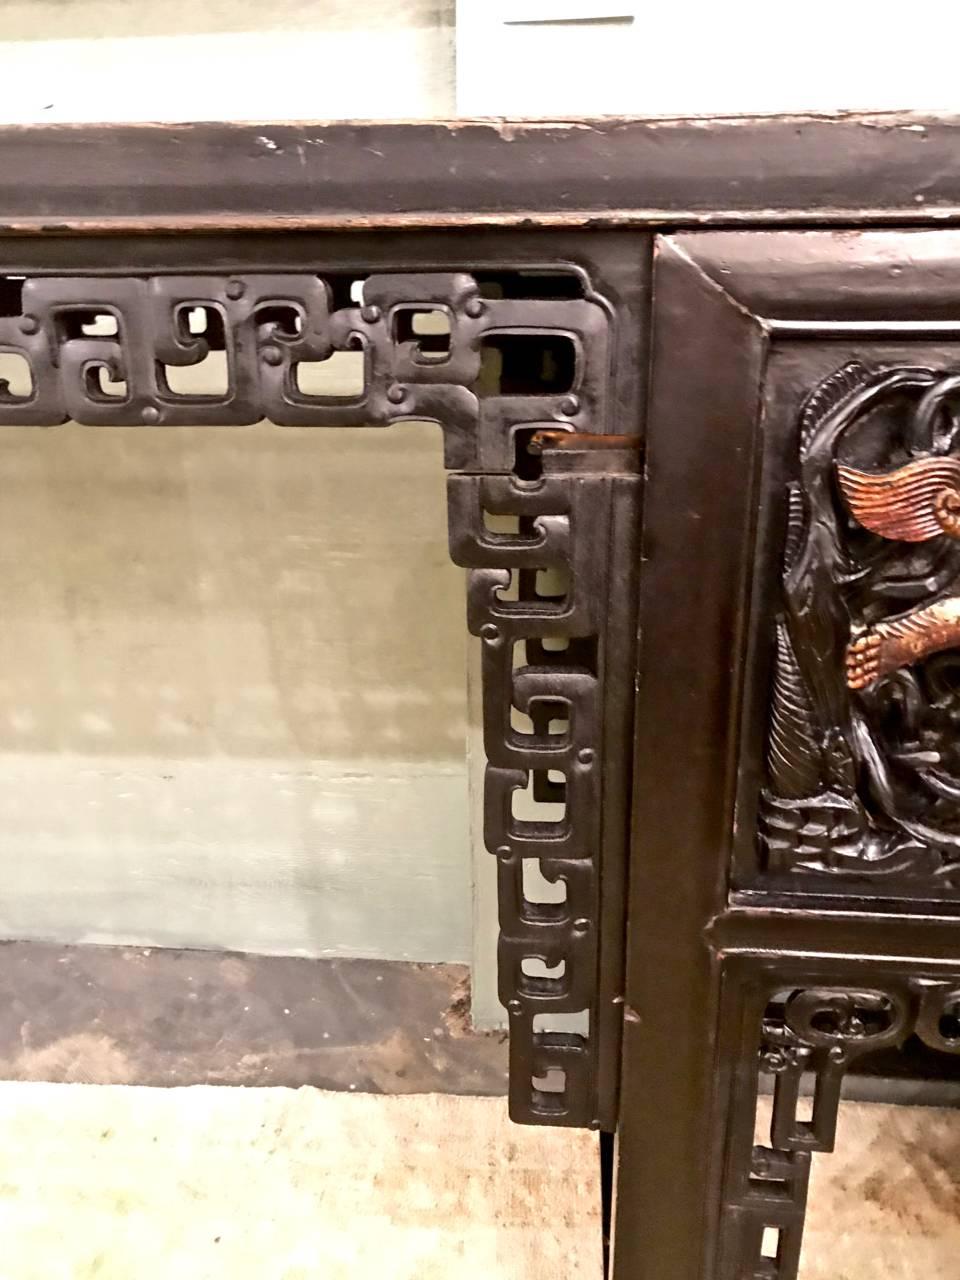 Mid-19th Century Chinese Altar Table